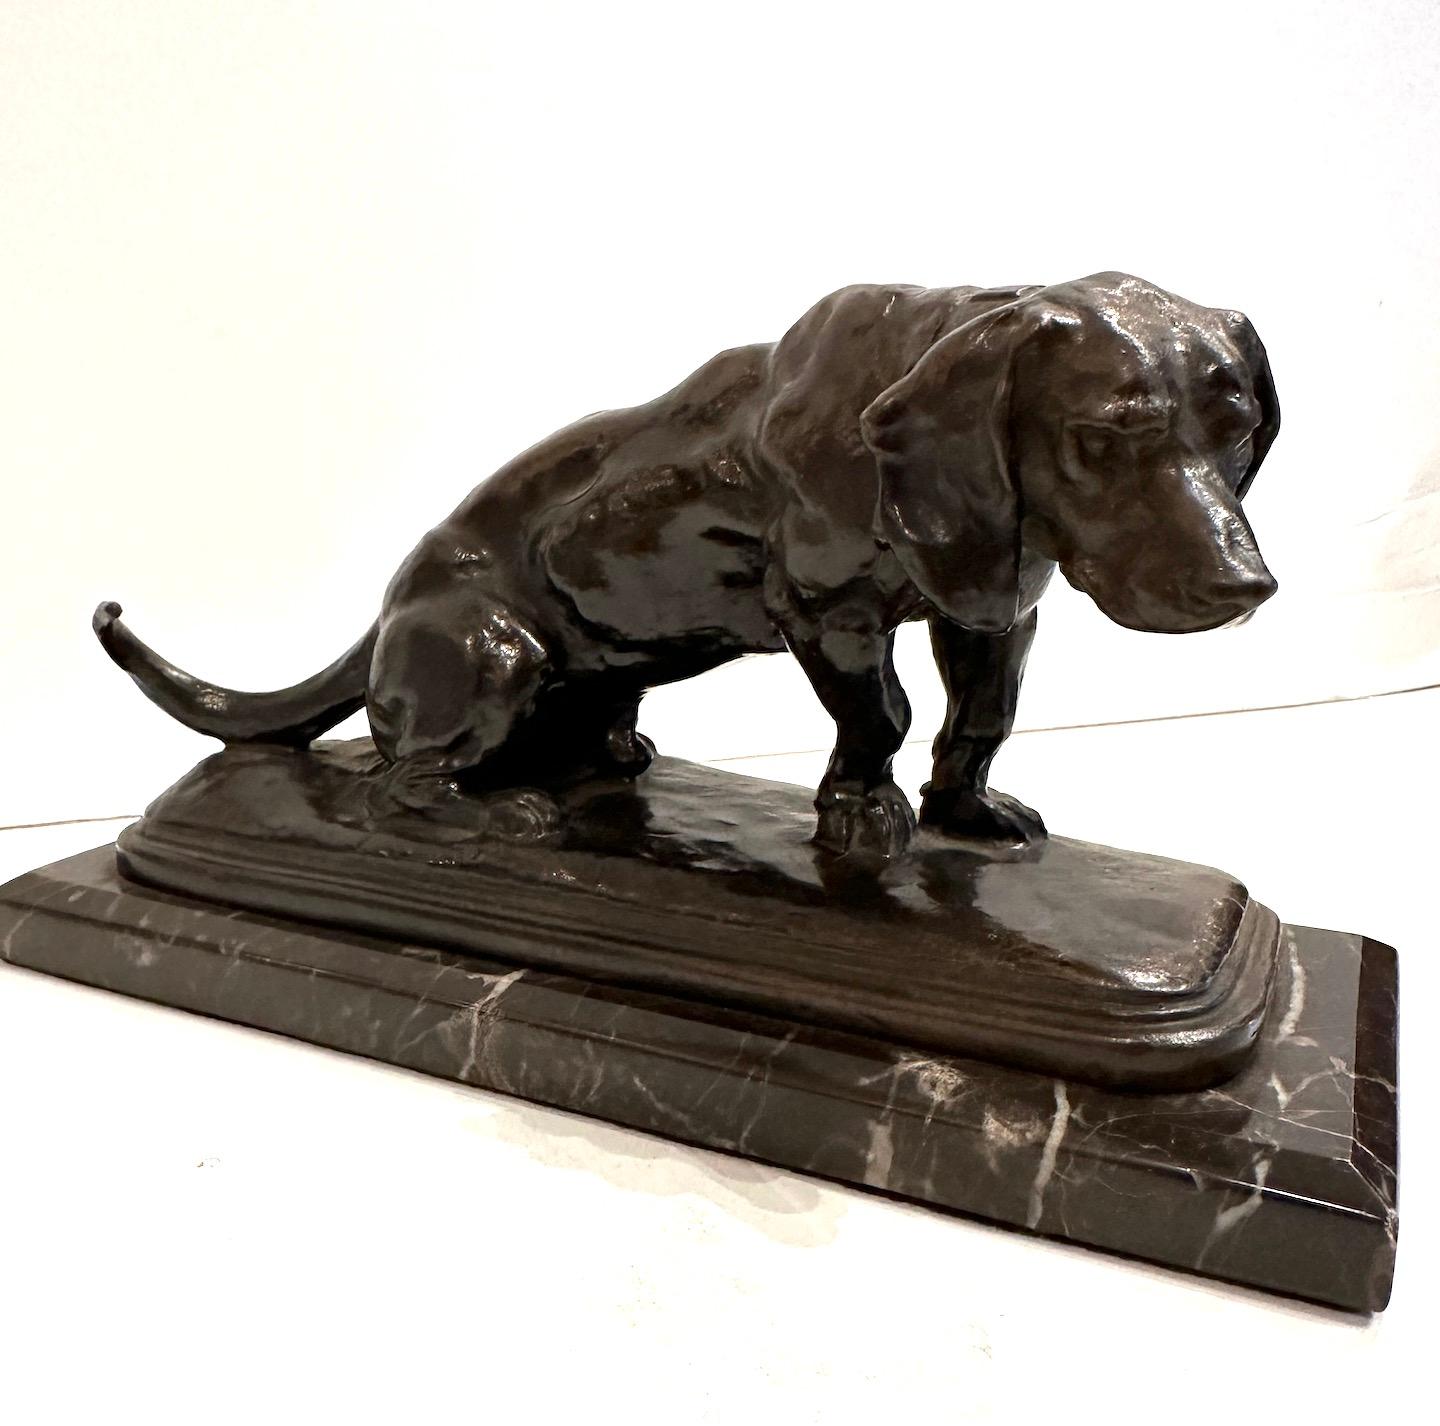 A bronze hound sculpture on marble based.  
Signed by French animalier sculptor Antoine-Louis Barye 1795-1875.
